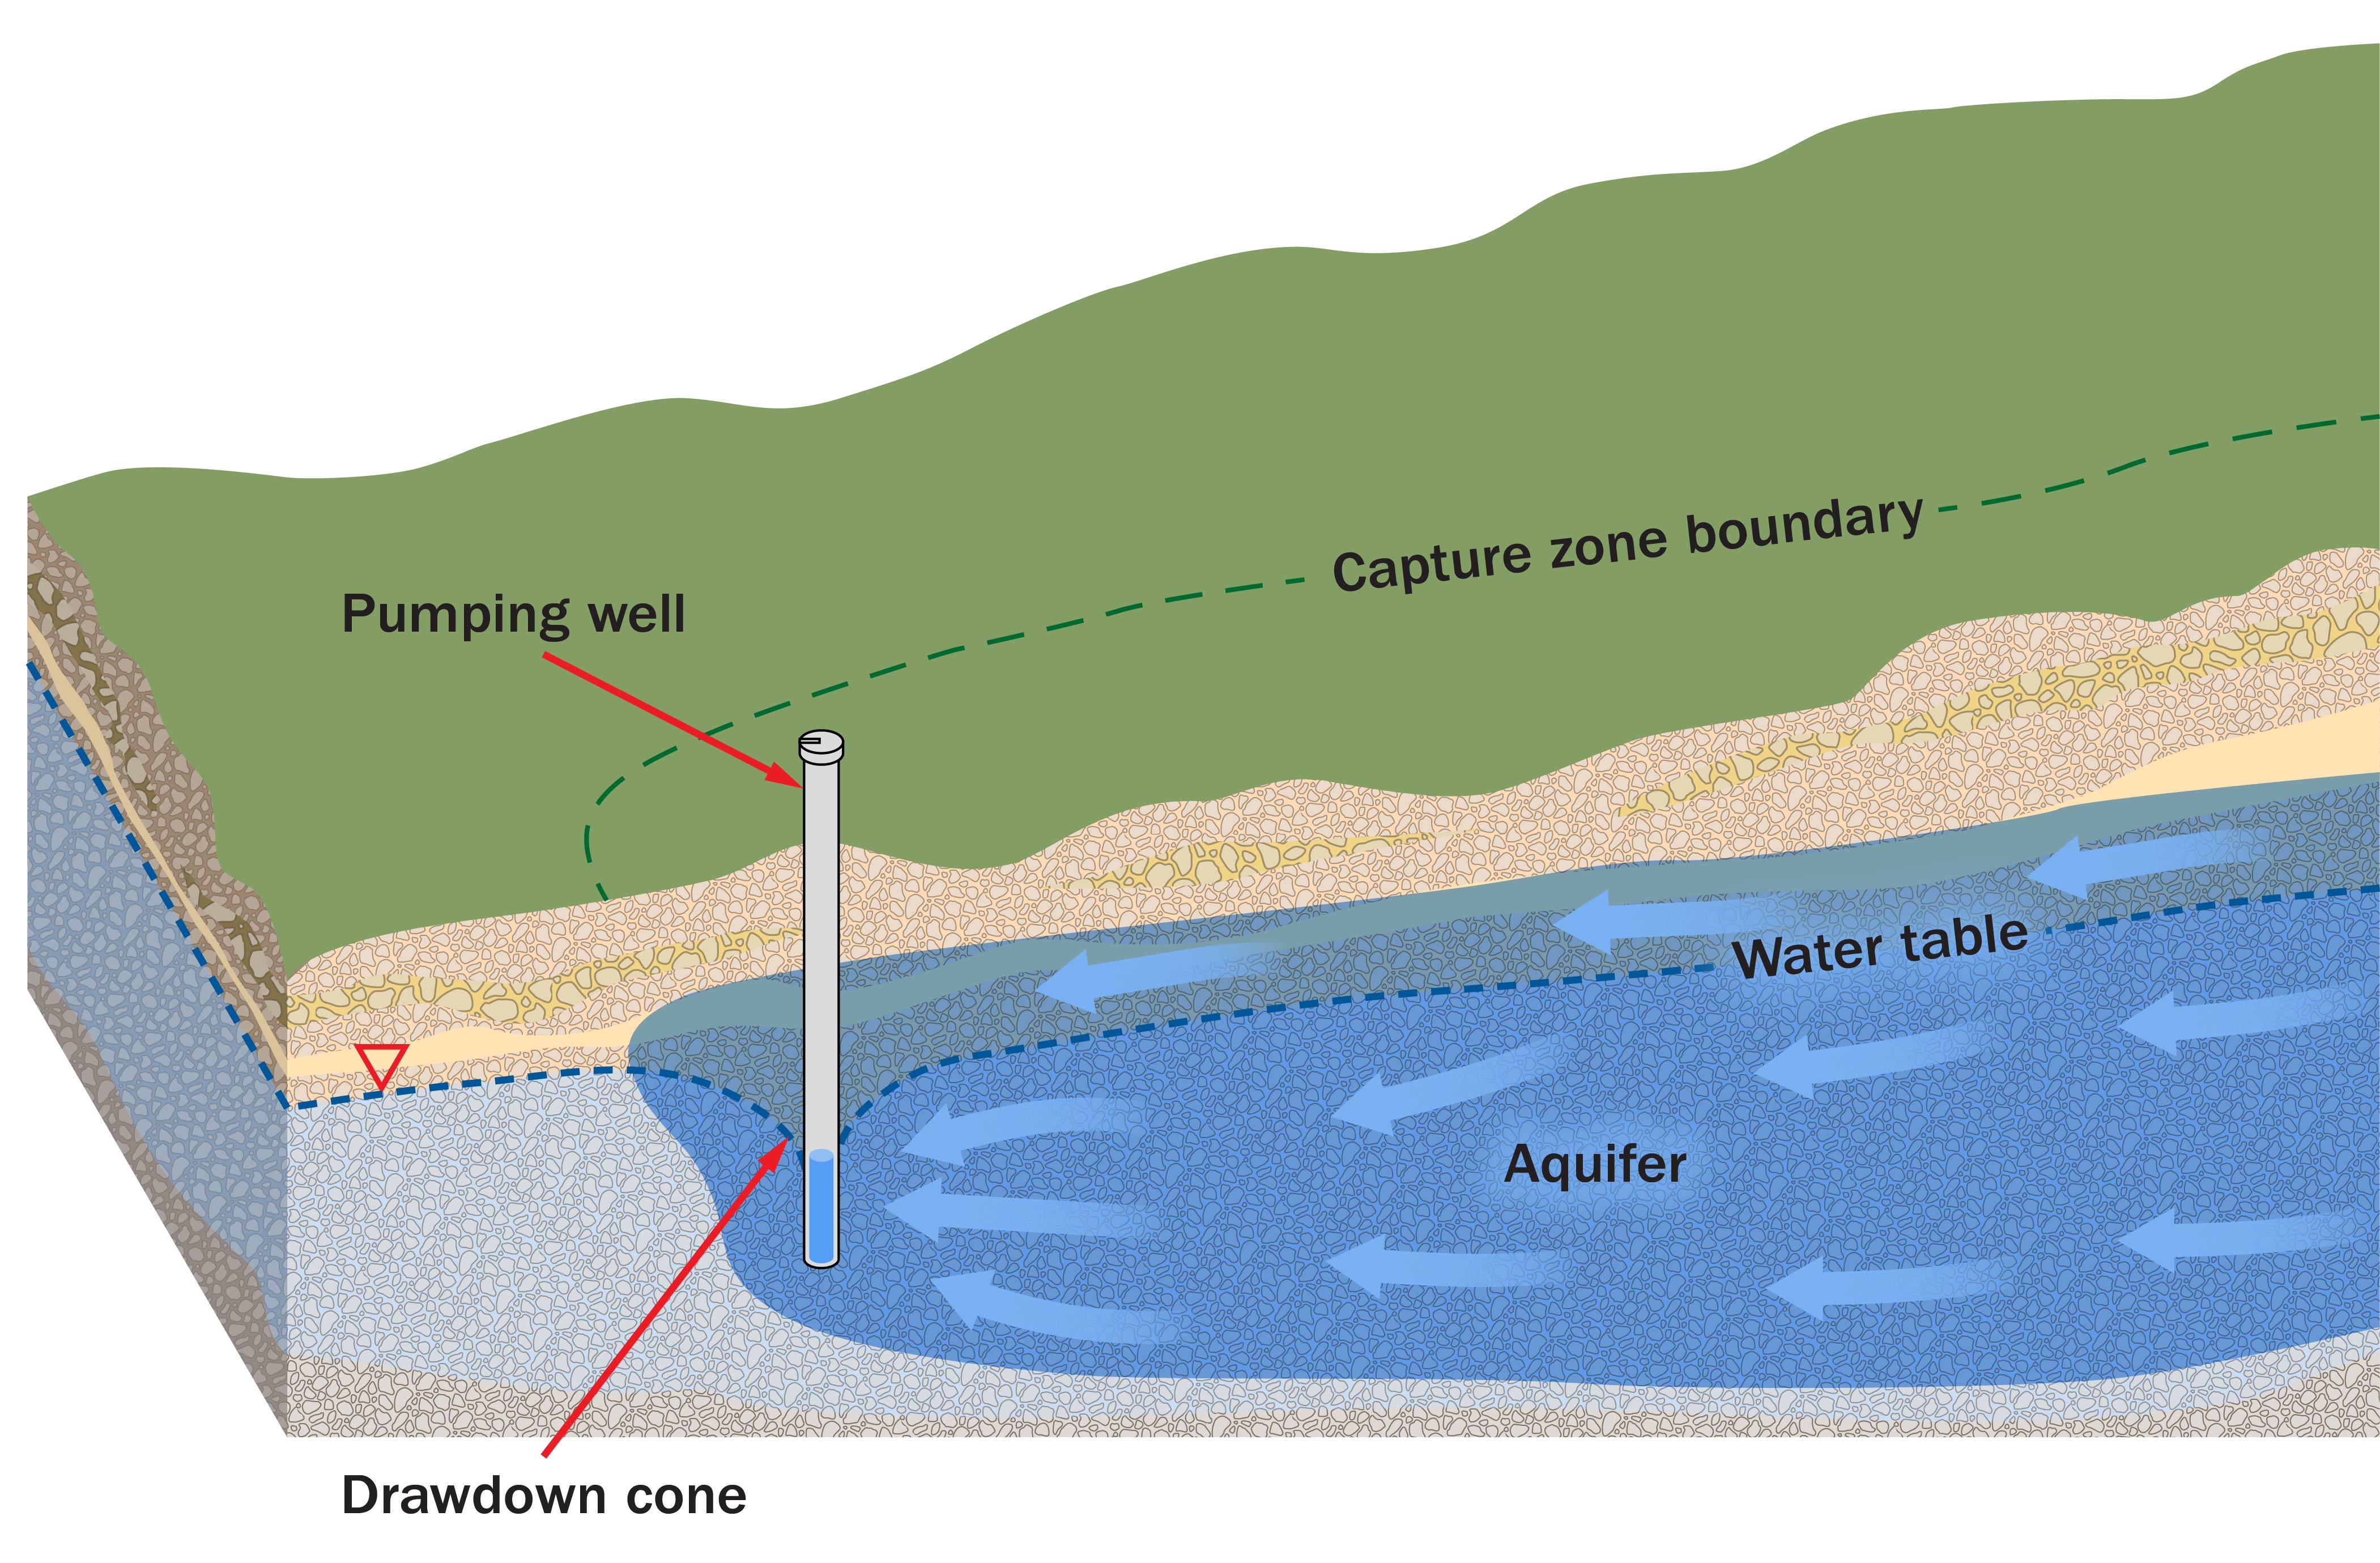 The well capture zone – the area on the ground surface through which precipitation recharges and is captured when pumped — for a private water well